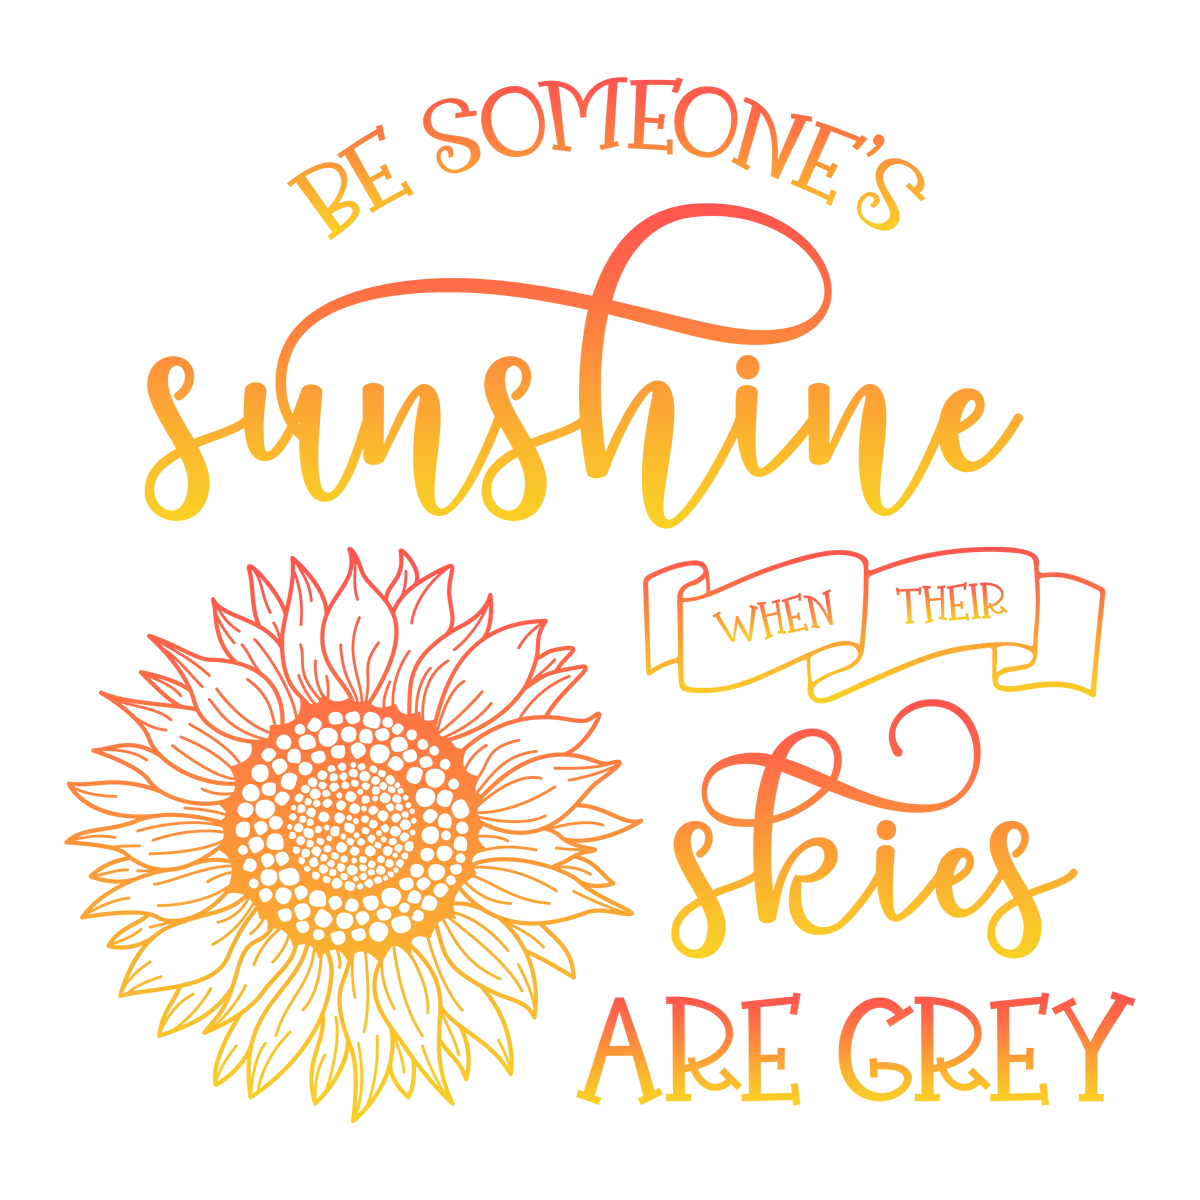 BE SOMEONES SUNSHINE WHEN THEIR SKIES ARE GREY